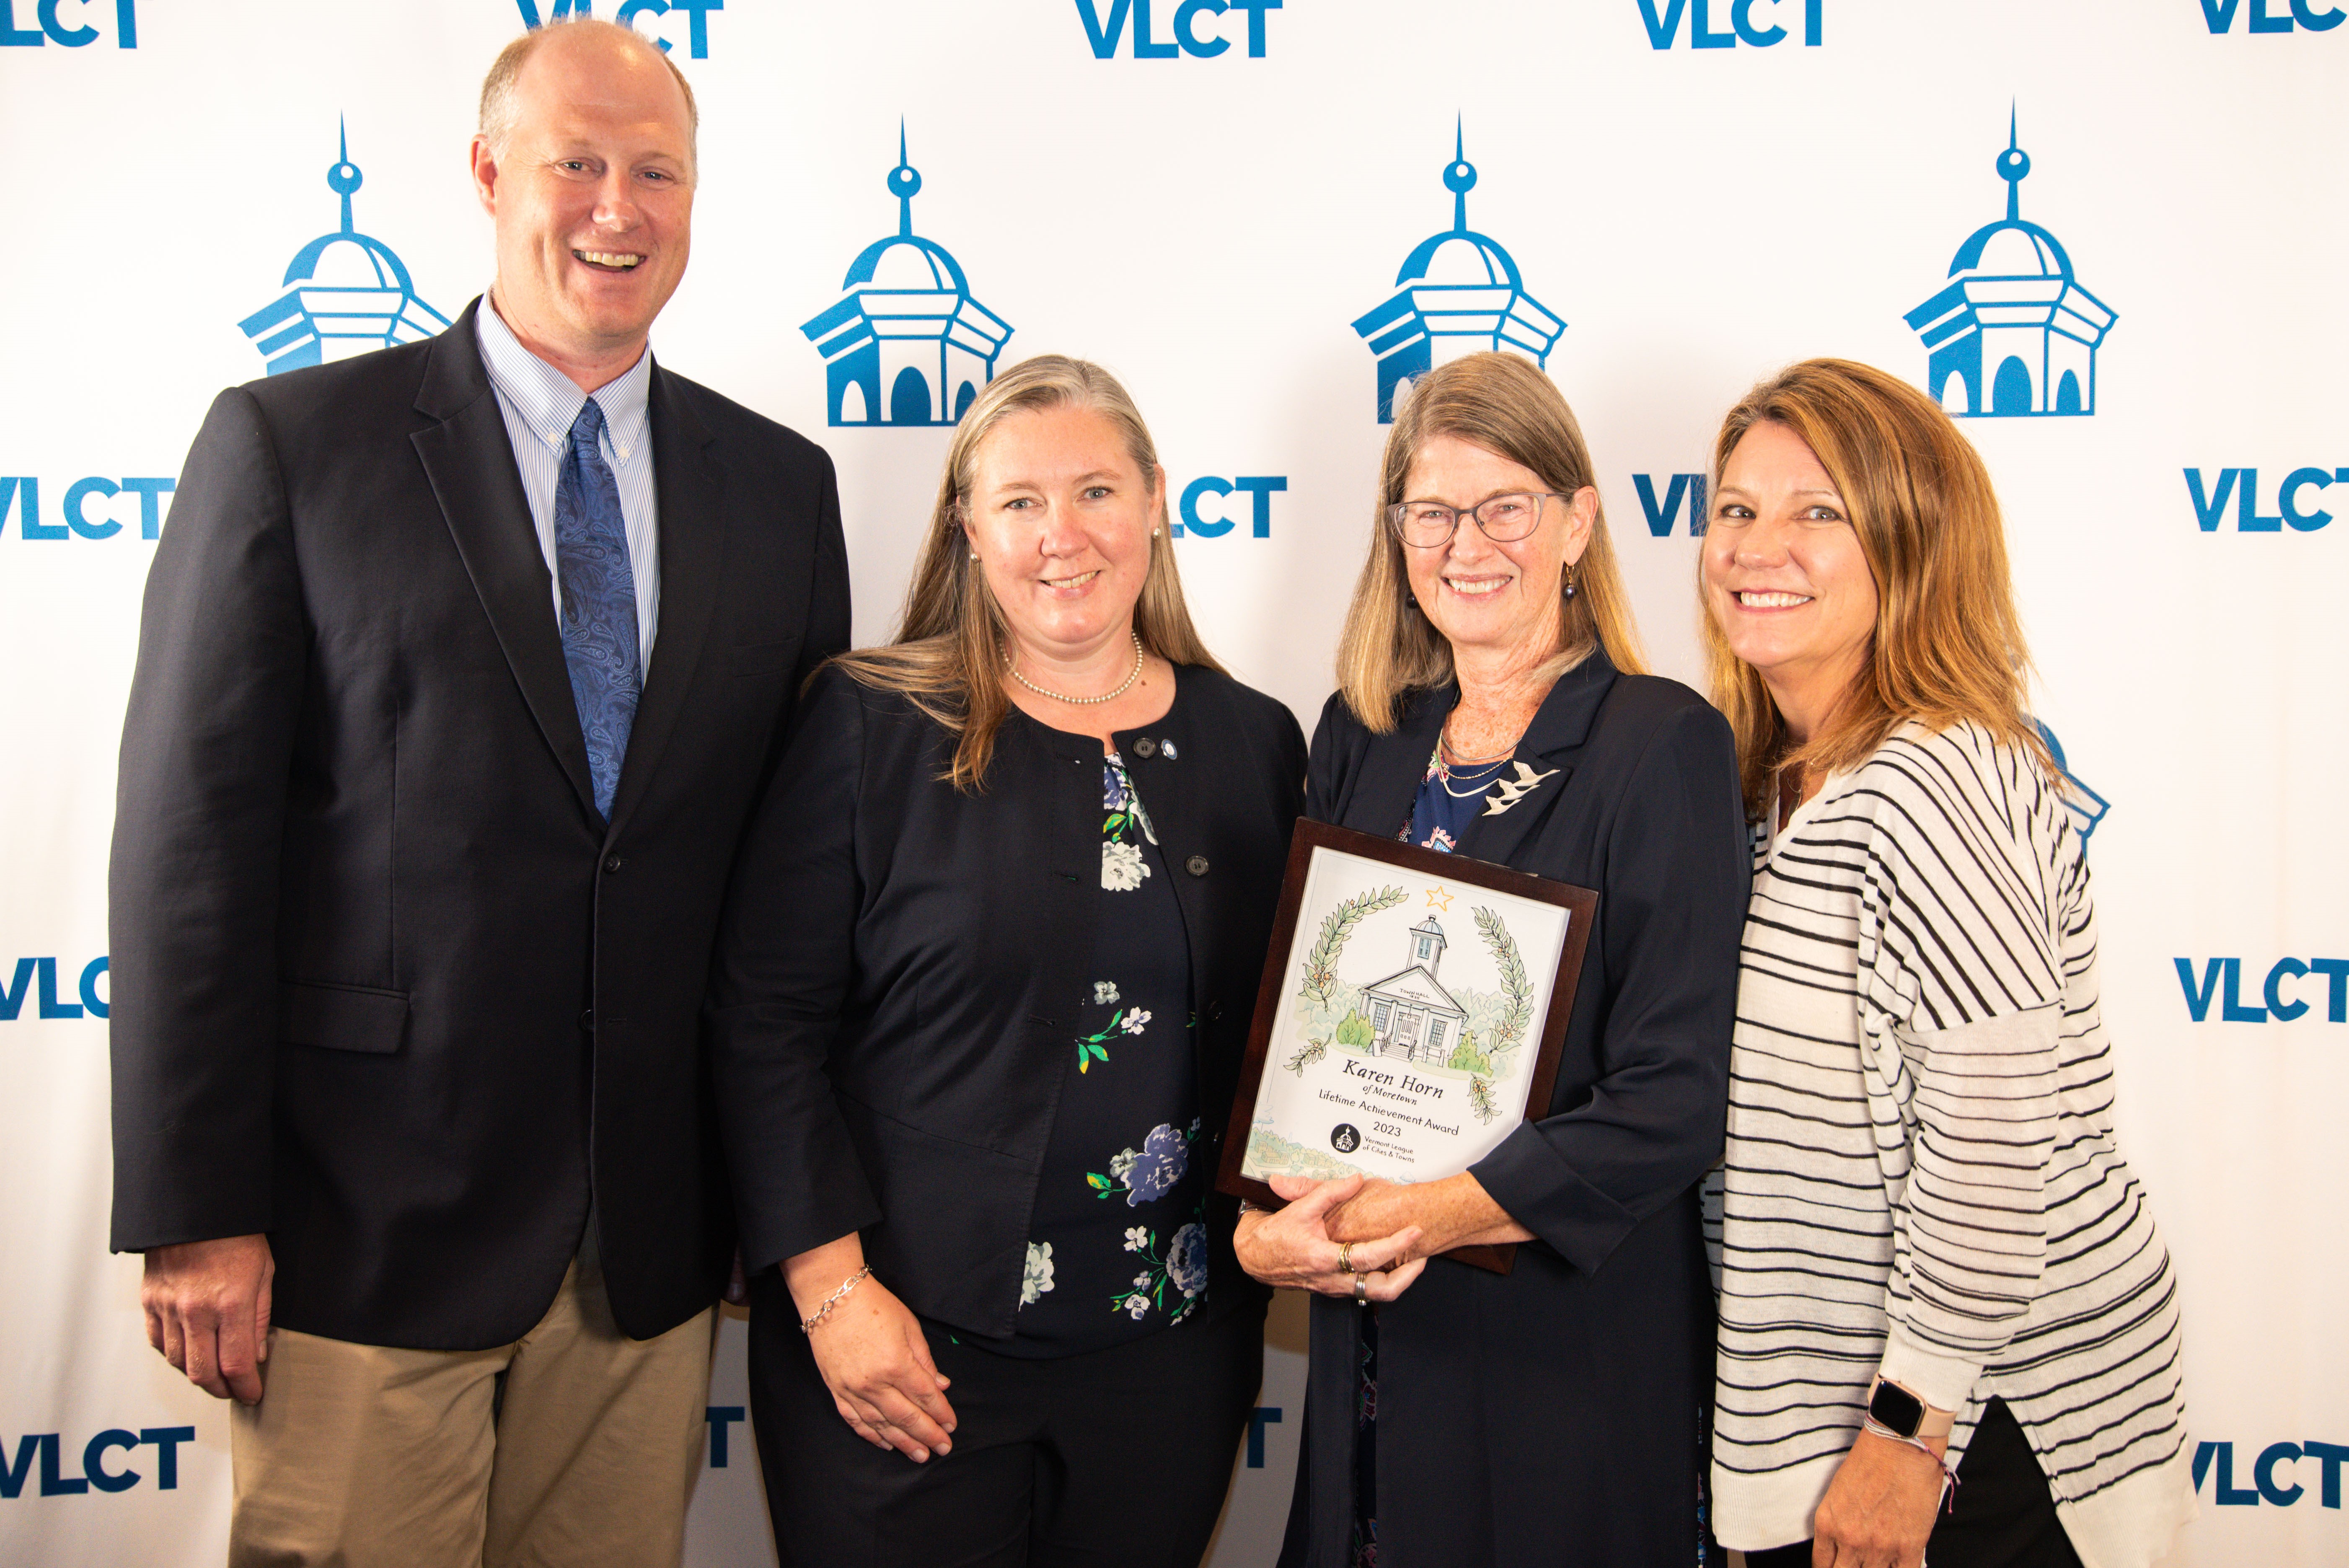 VLCT Executive Director Ted Brady presenting the 2023 VLCT Lifetime Achievement Award to VLCT’s recently retired Director of Public Policy and Advocacy, Karen Horn of Moretown.